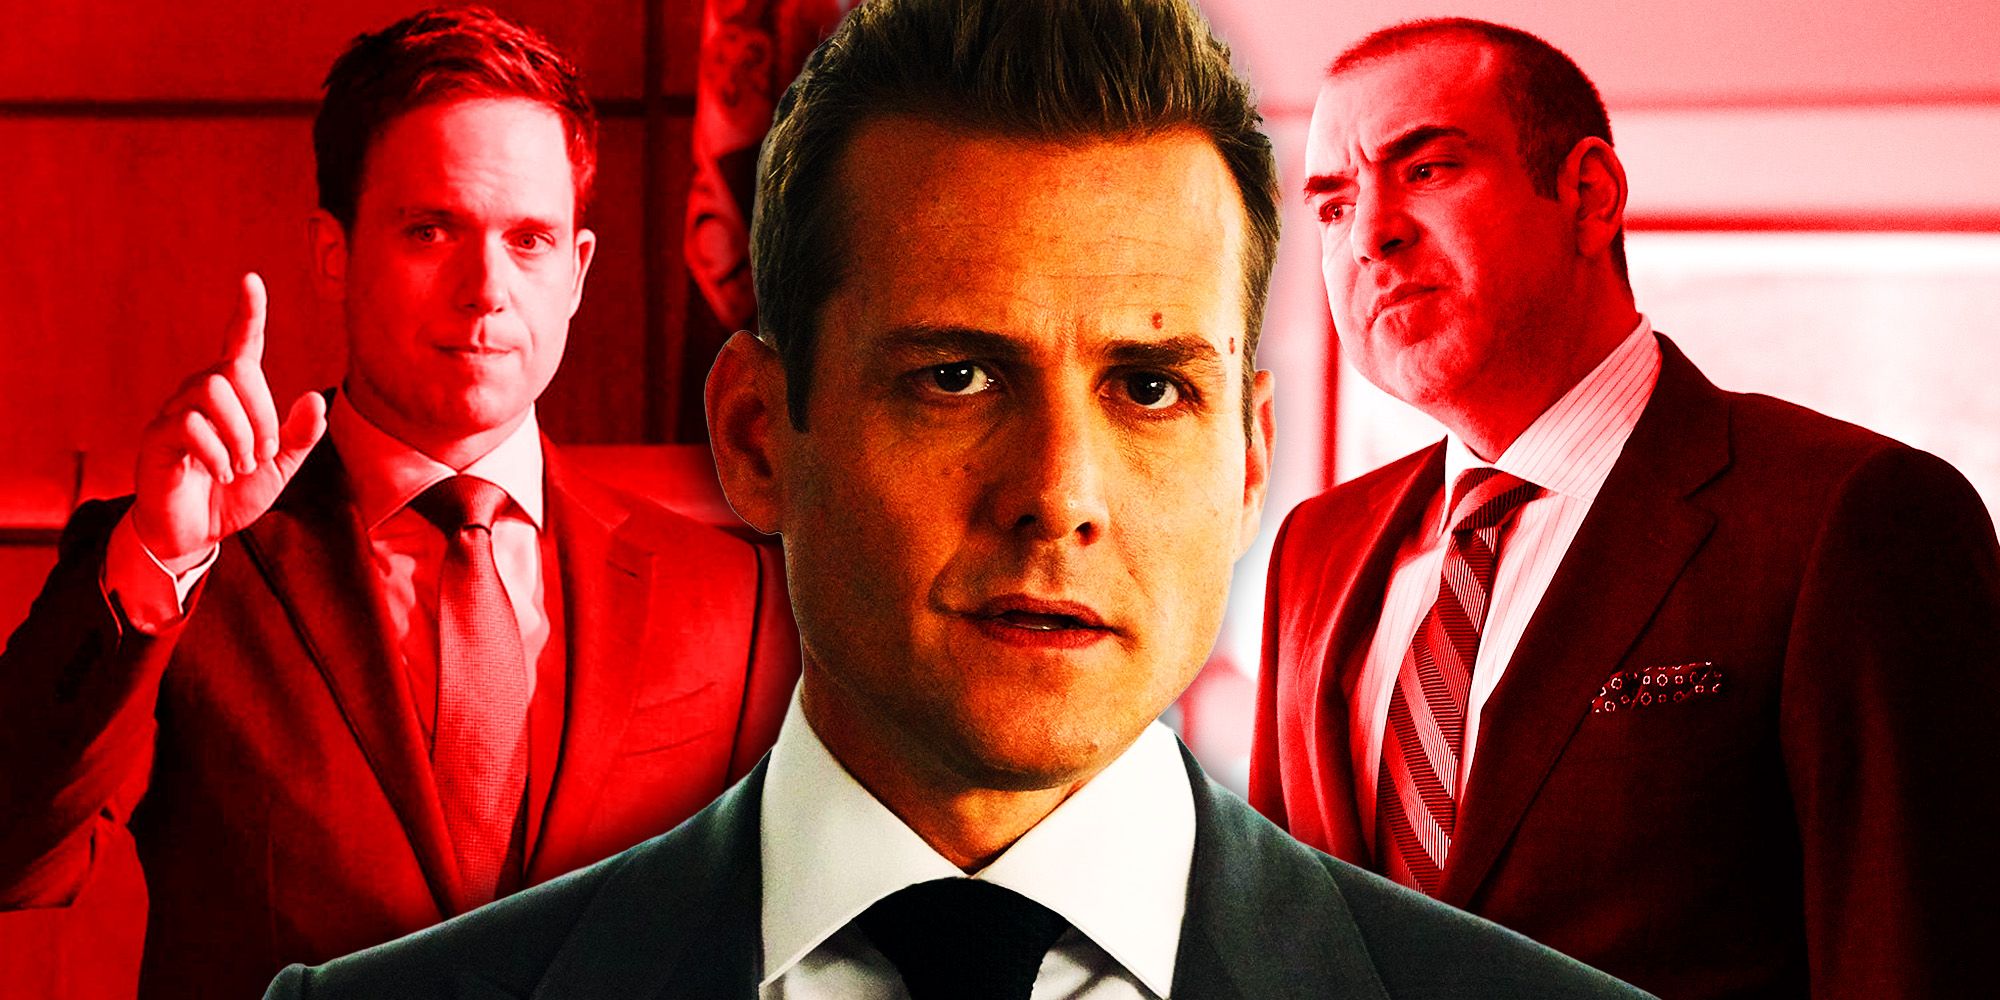 Suits' is having a moment on Netflix. Why aren't its writers